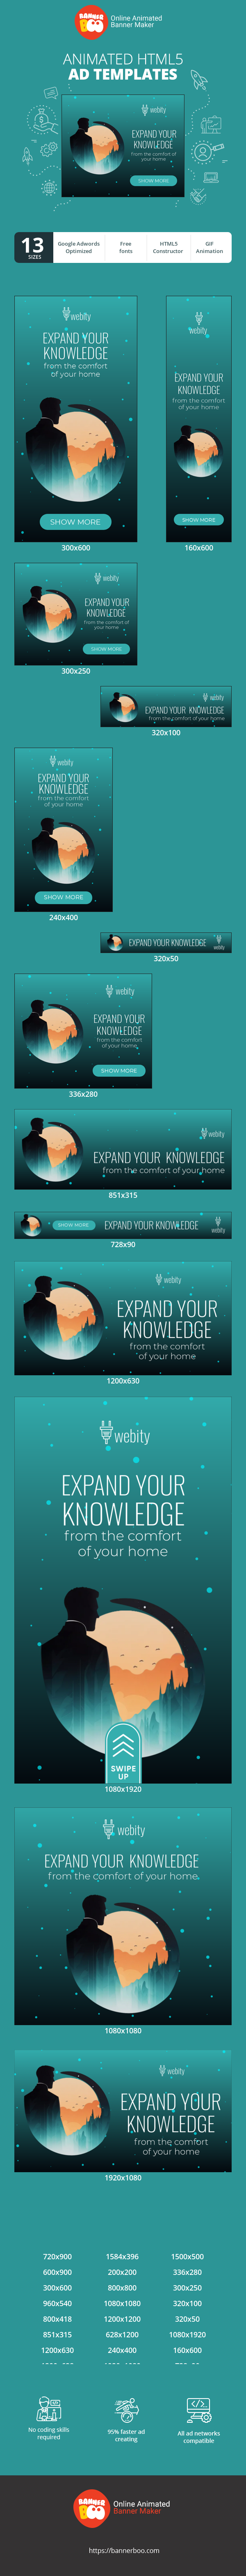 Шаблон рекламного банера — Expand Your Knowledge — From The Comfort Of Your Home